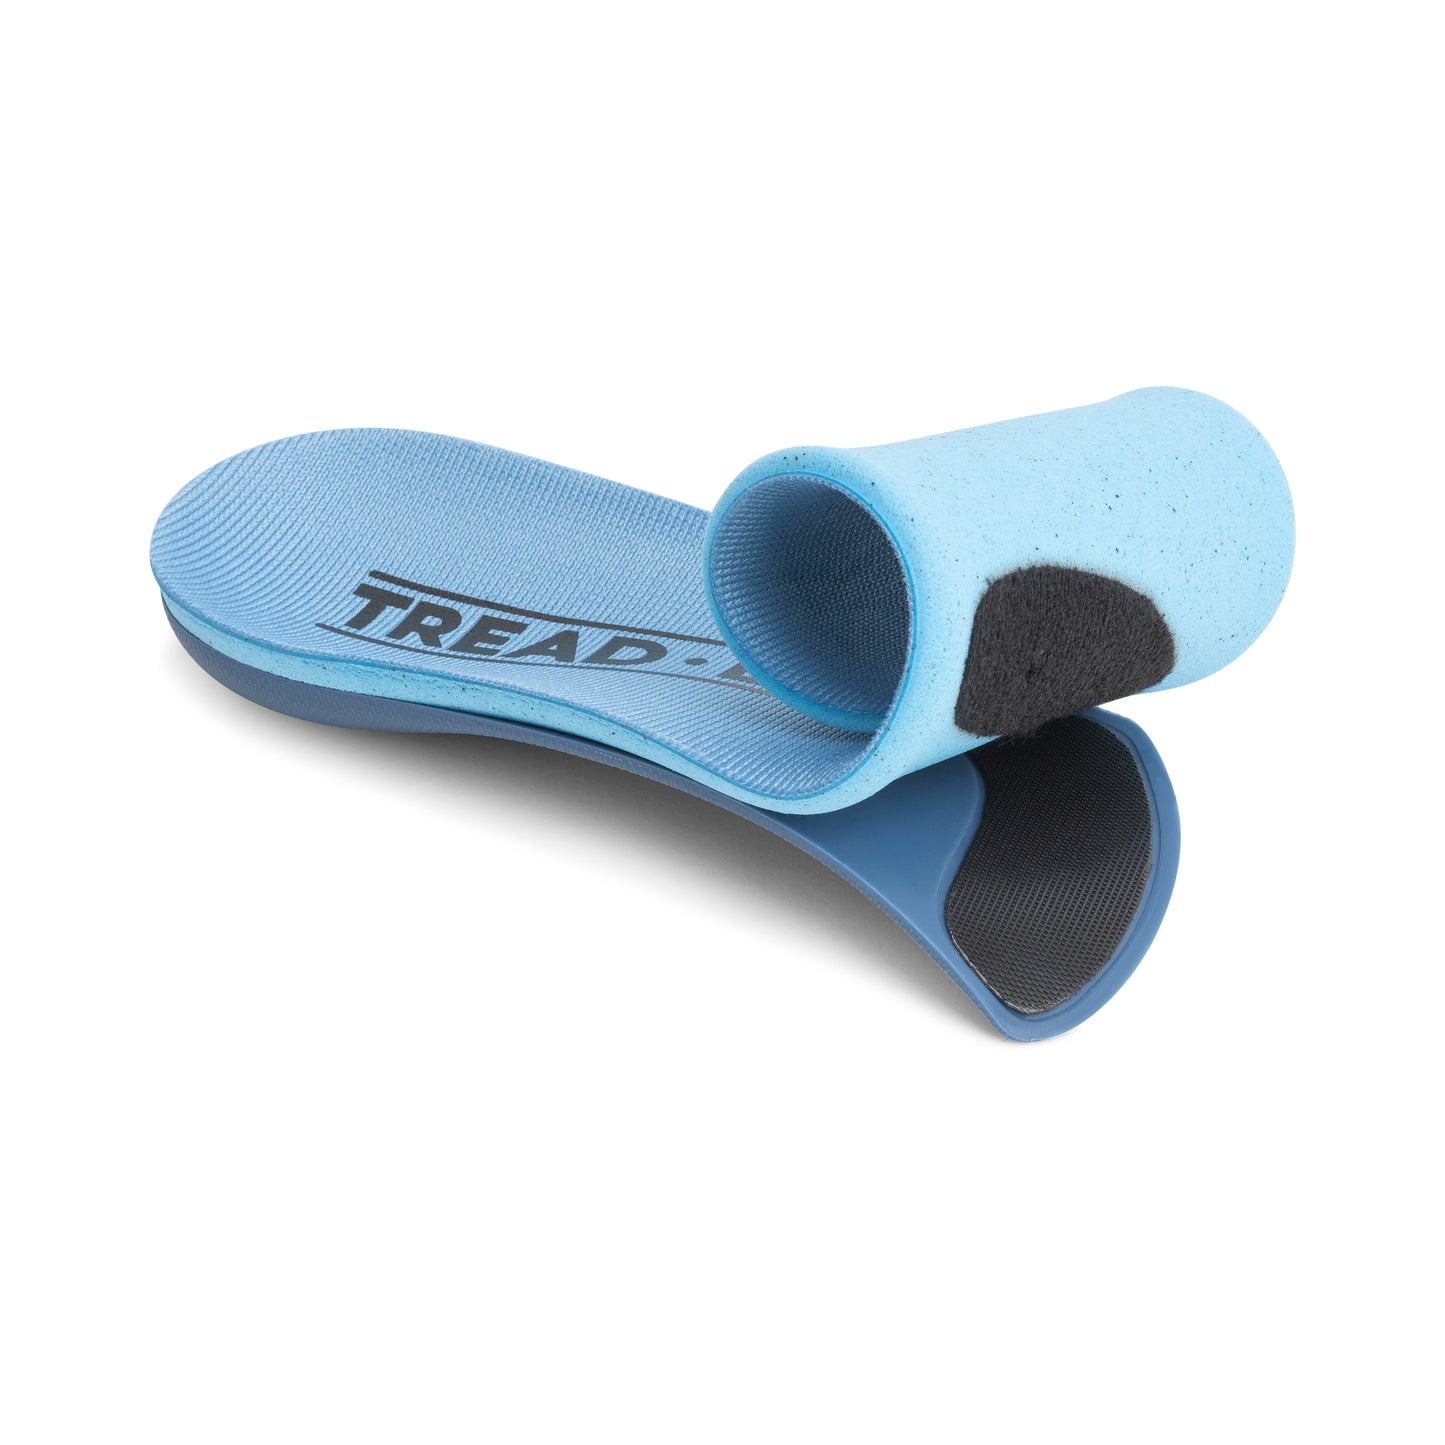 Pace orthotic shoe inserts with replacement top covers